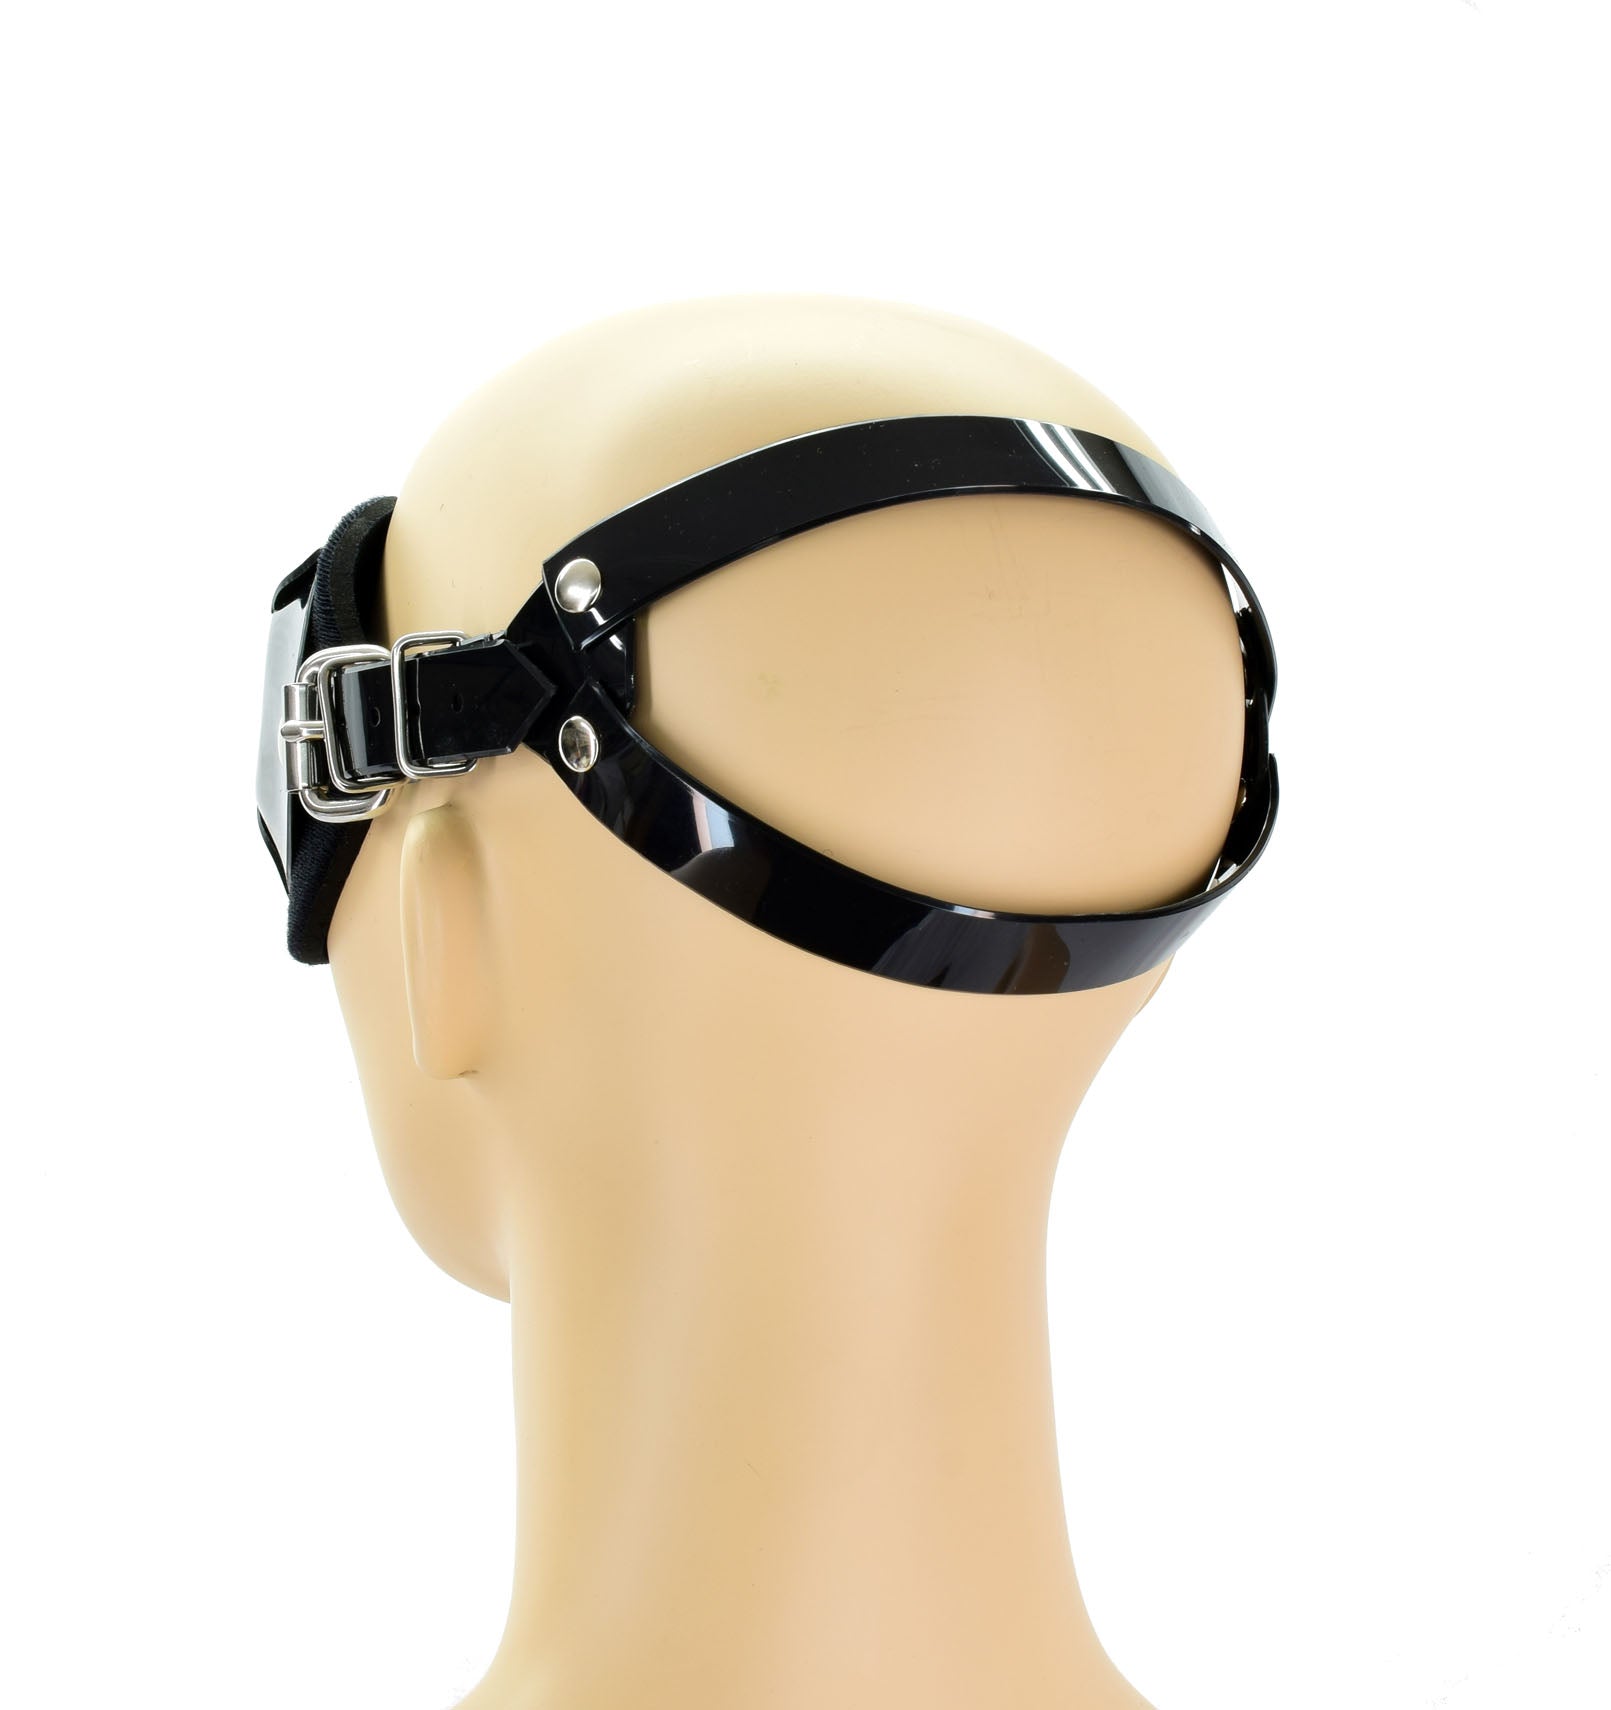 The PVC Ultimate Blindfold on a mannequin head, rear view.